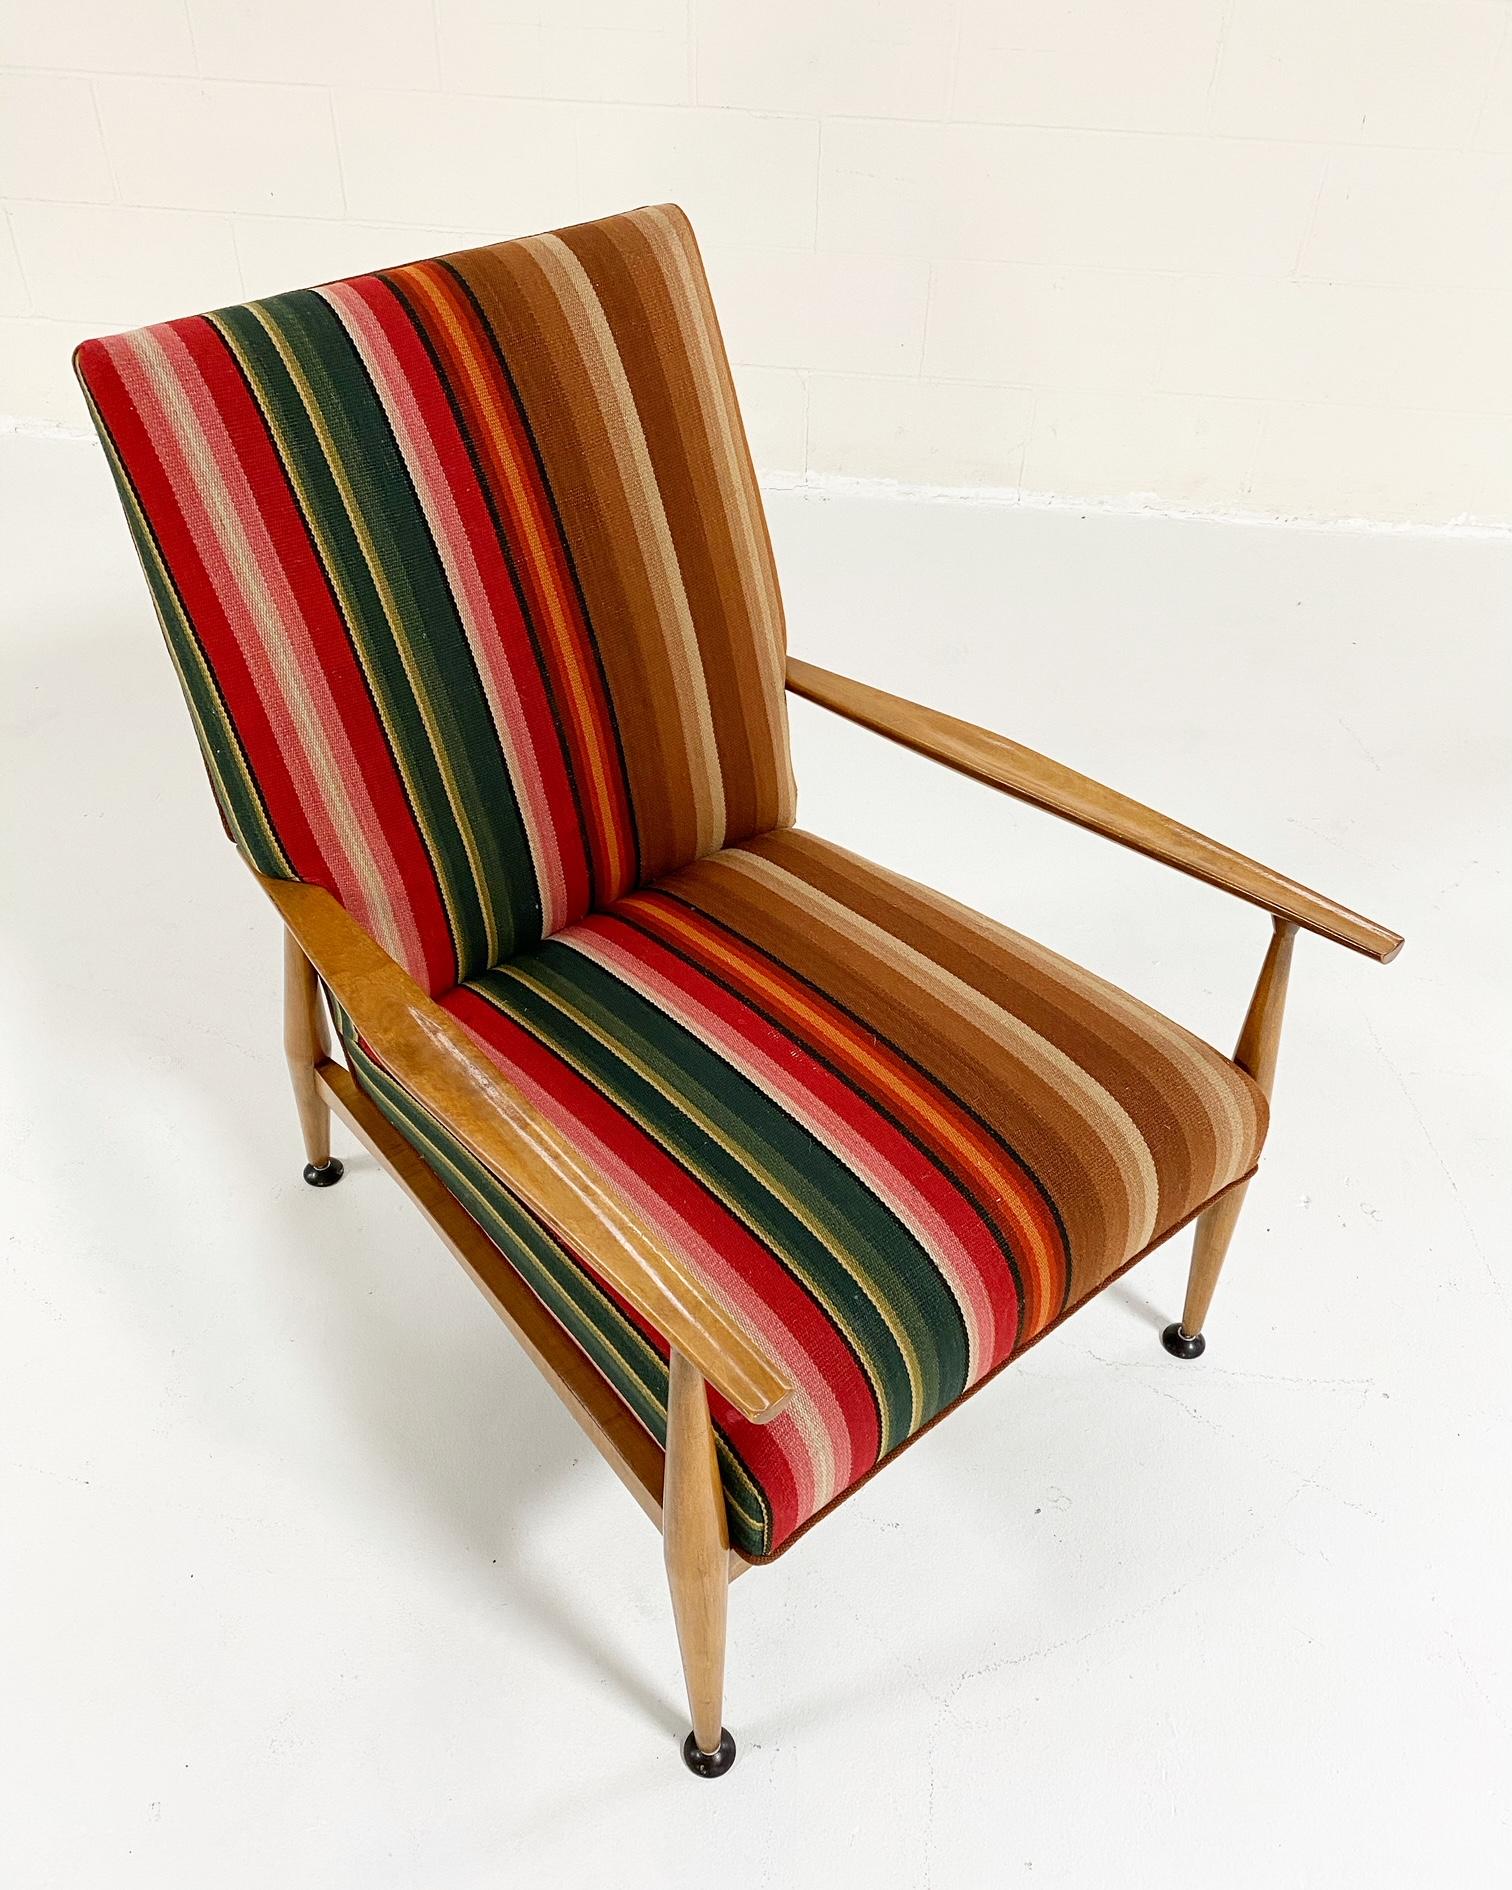 Paul McCobb's modern take on traditional pieces makes him a favorite among American midcentury designers. Completely restored and masterfully reupholstered in a cool vintage Guatemalan fabric that complements the beautifully toned wood frame, we